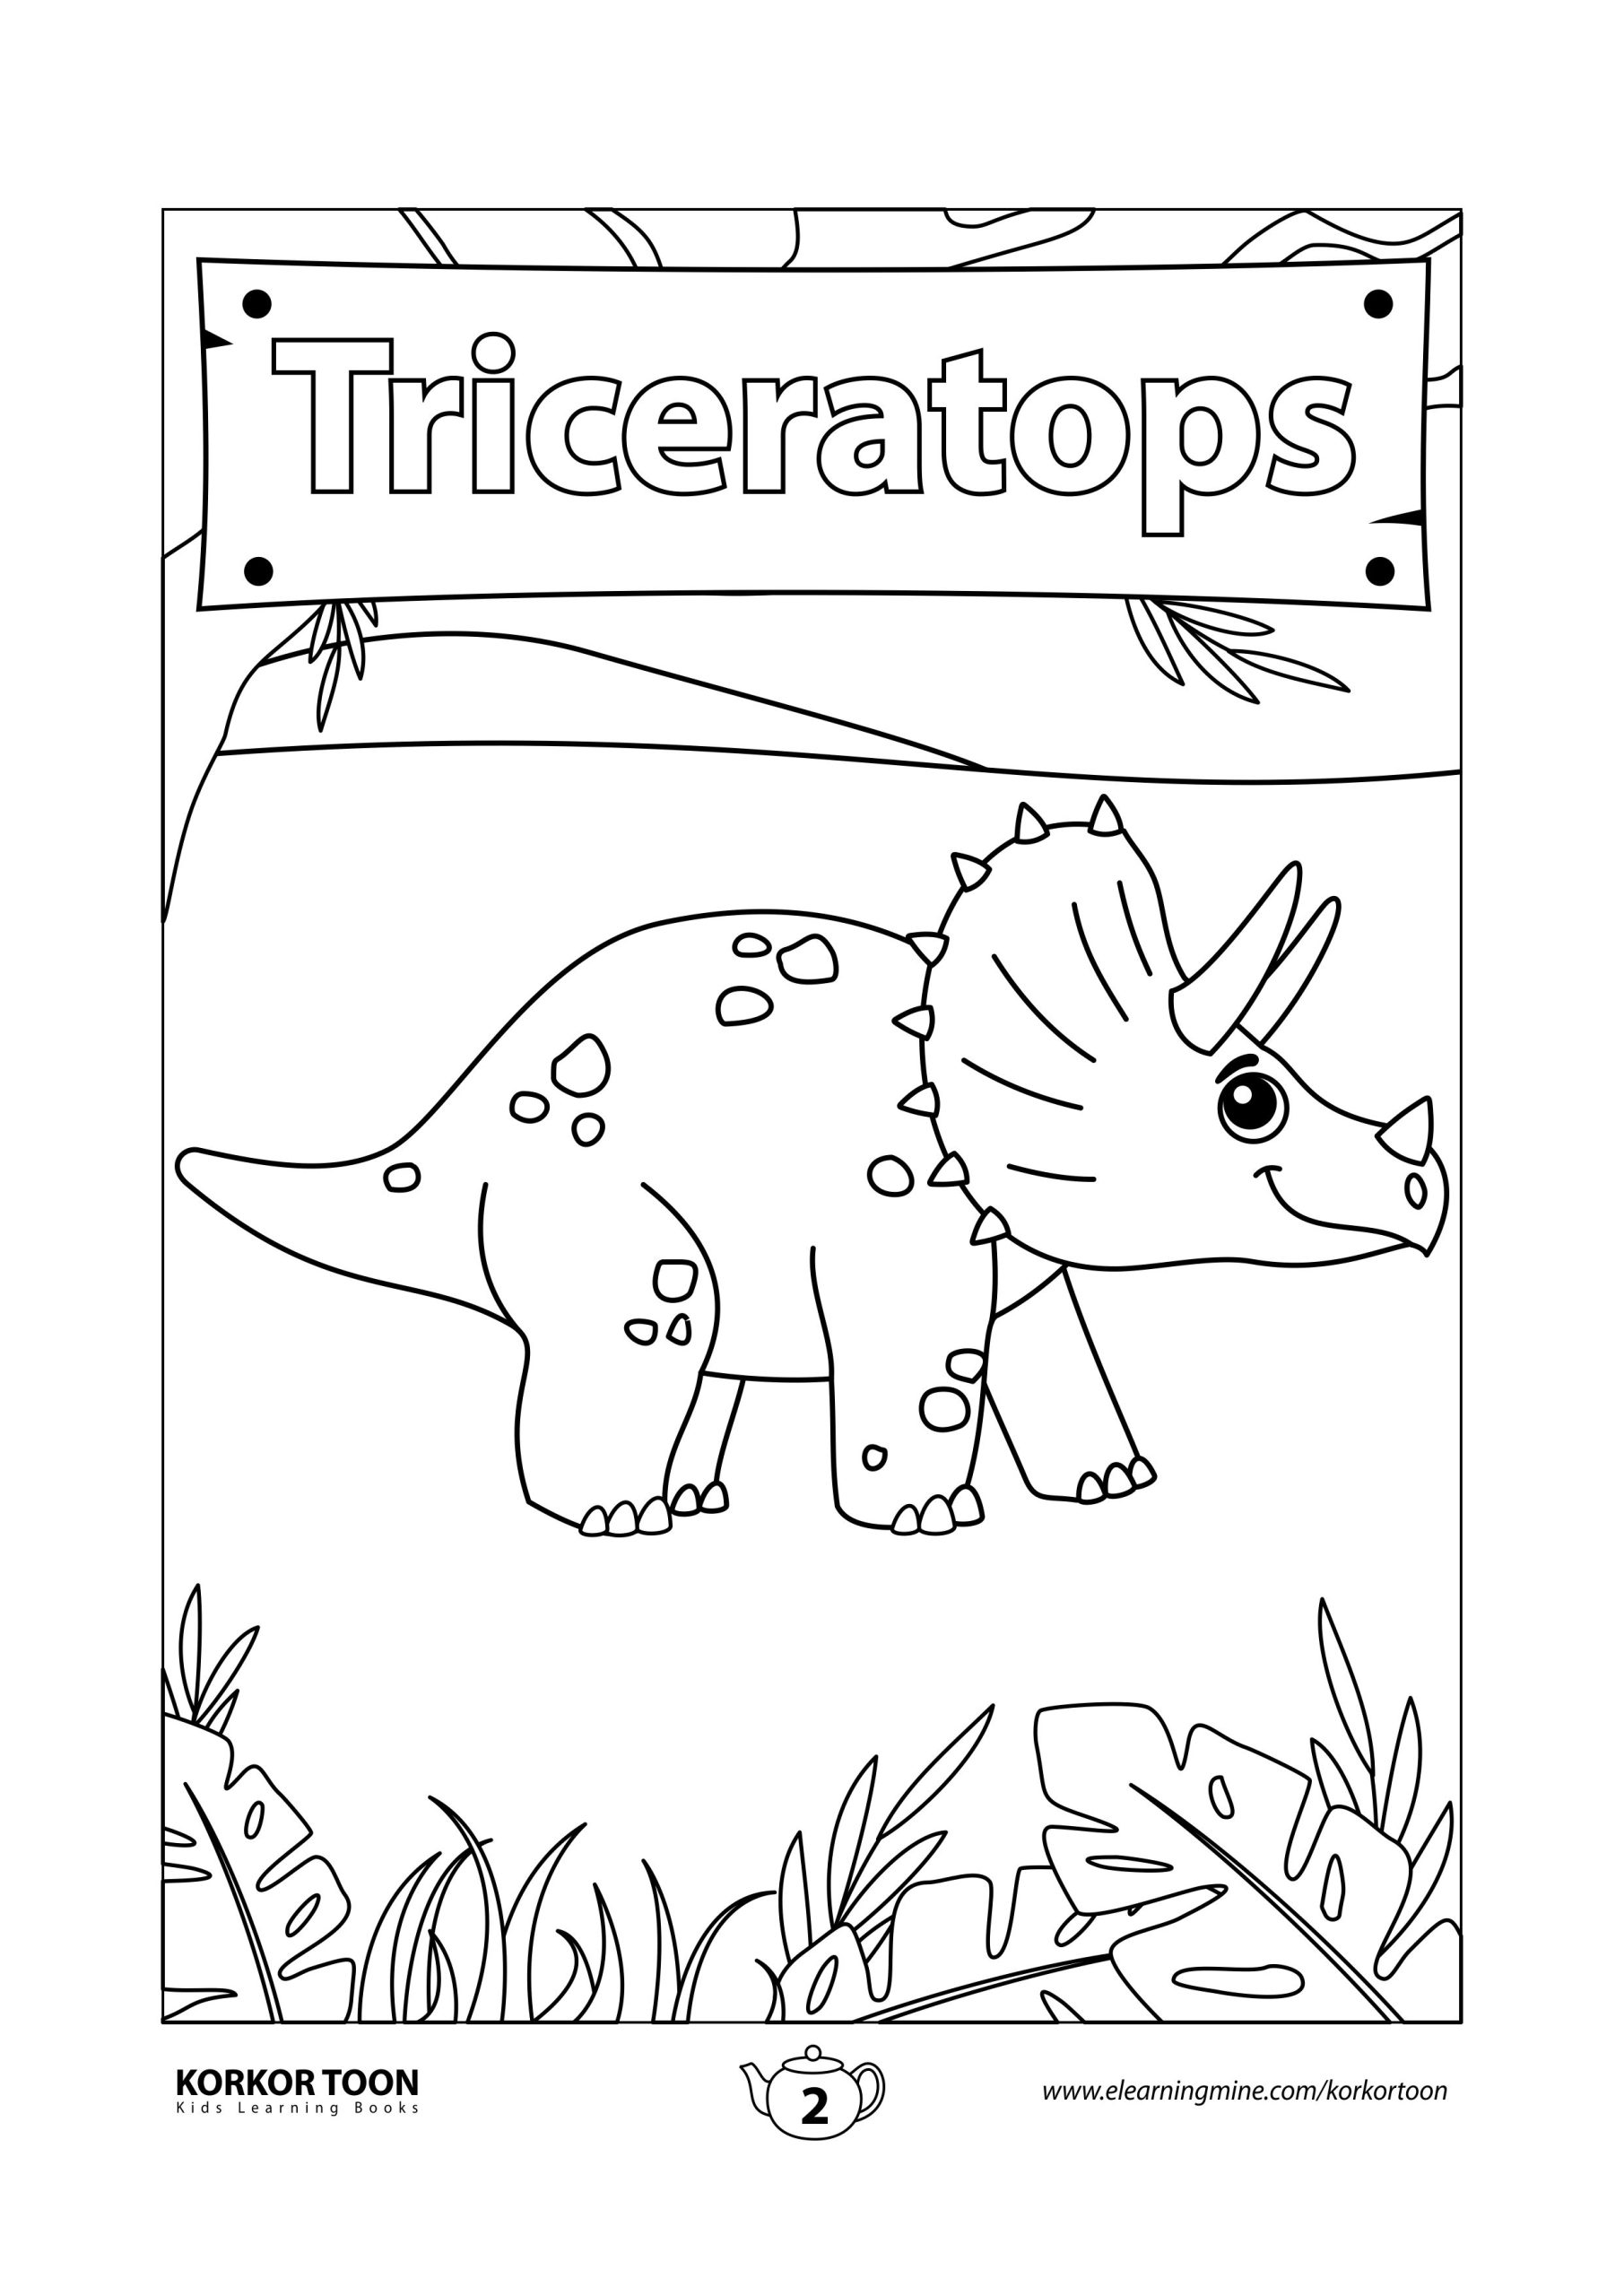 Dinosaurs Coloring Book for Kids | Triceratops Coloring Page